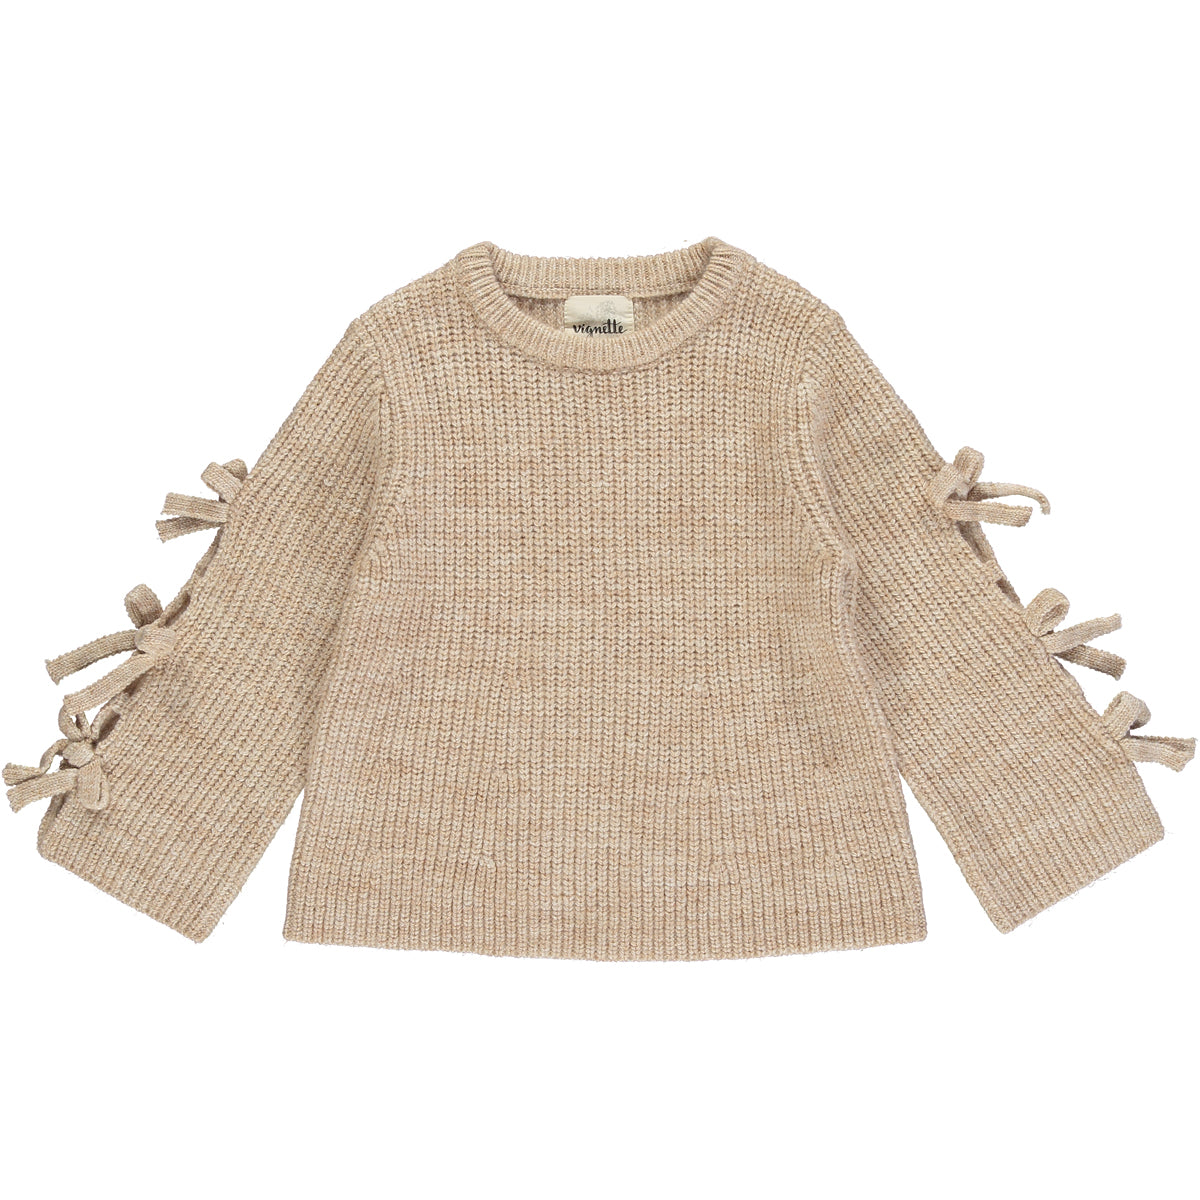 Francis Knit Sweater in Oatmeal